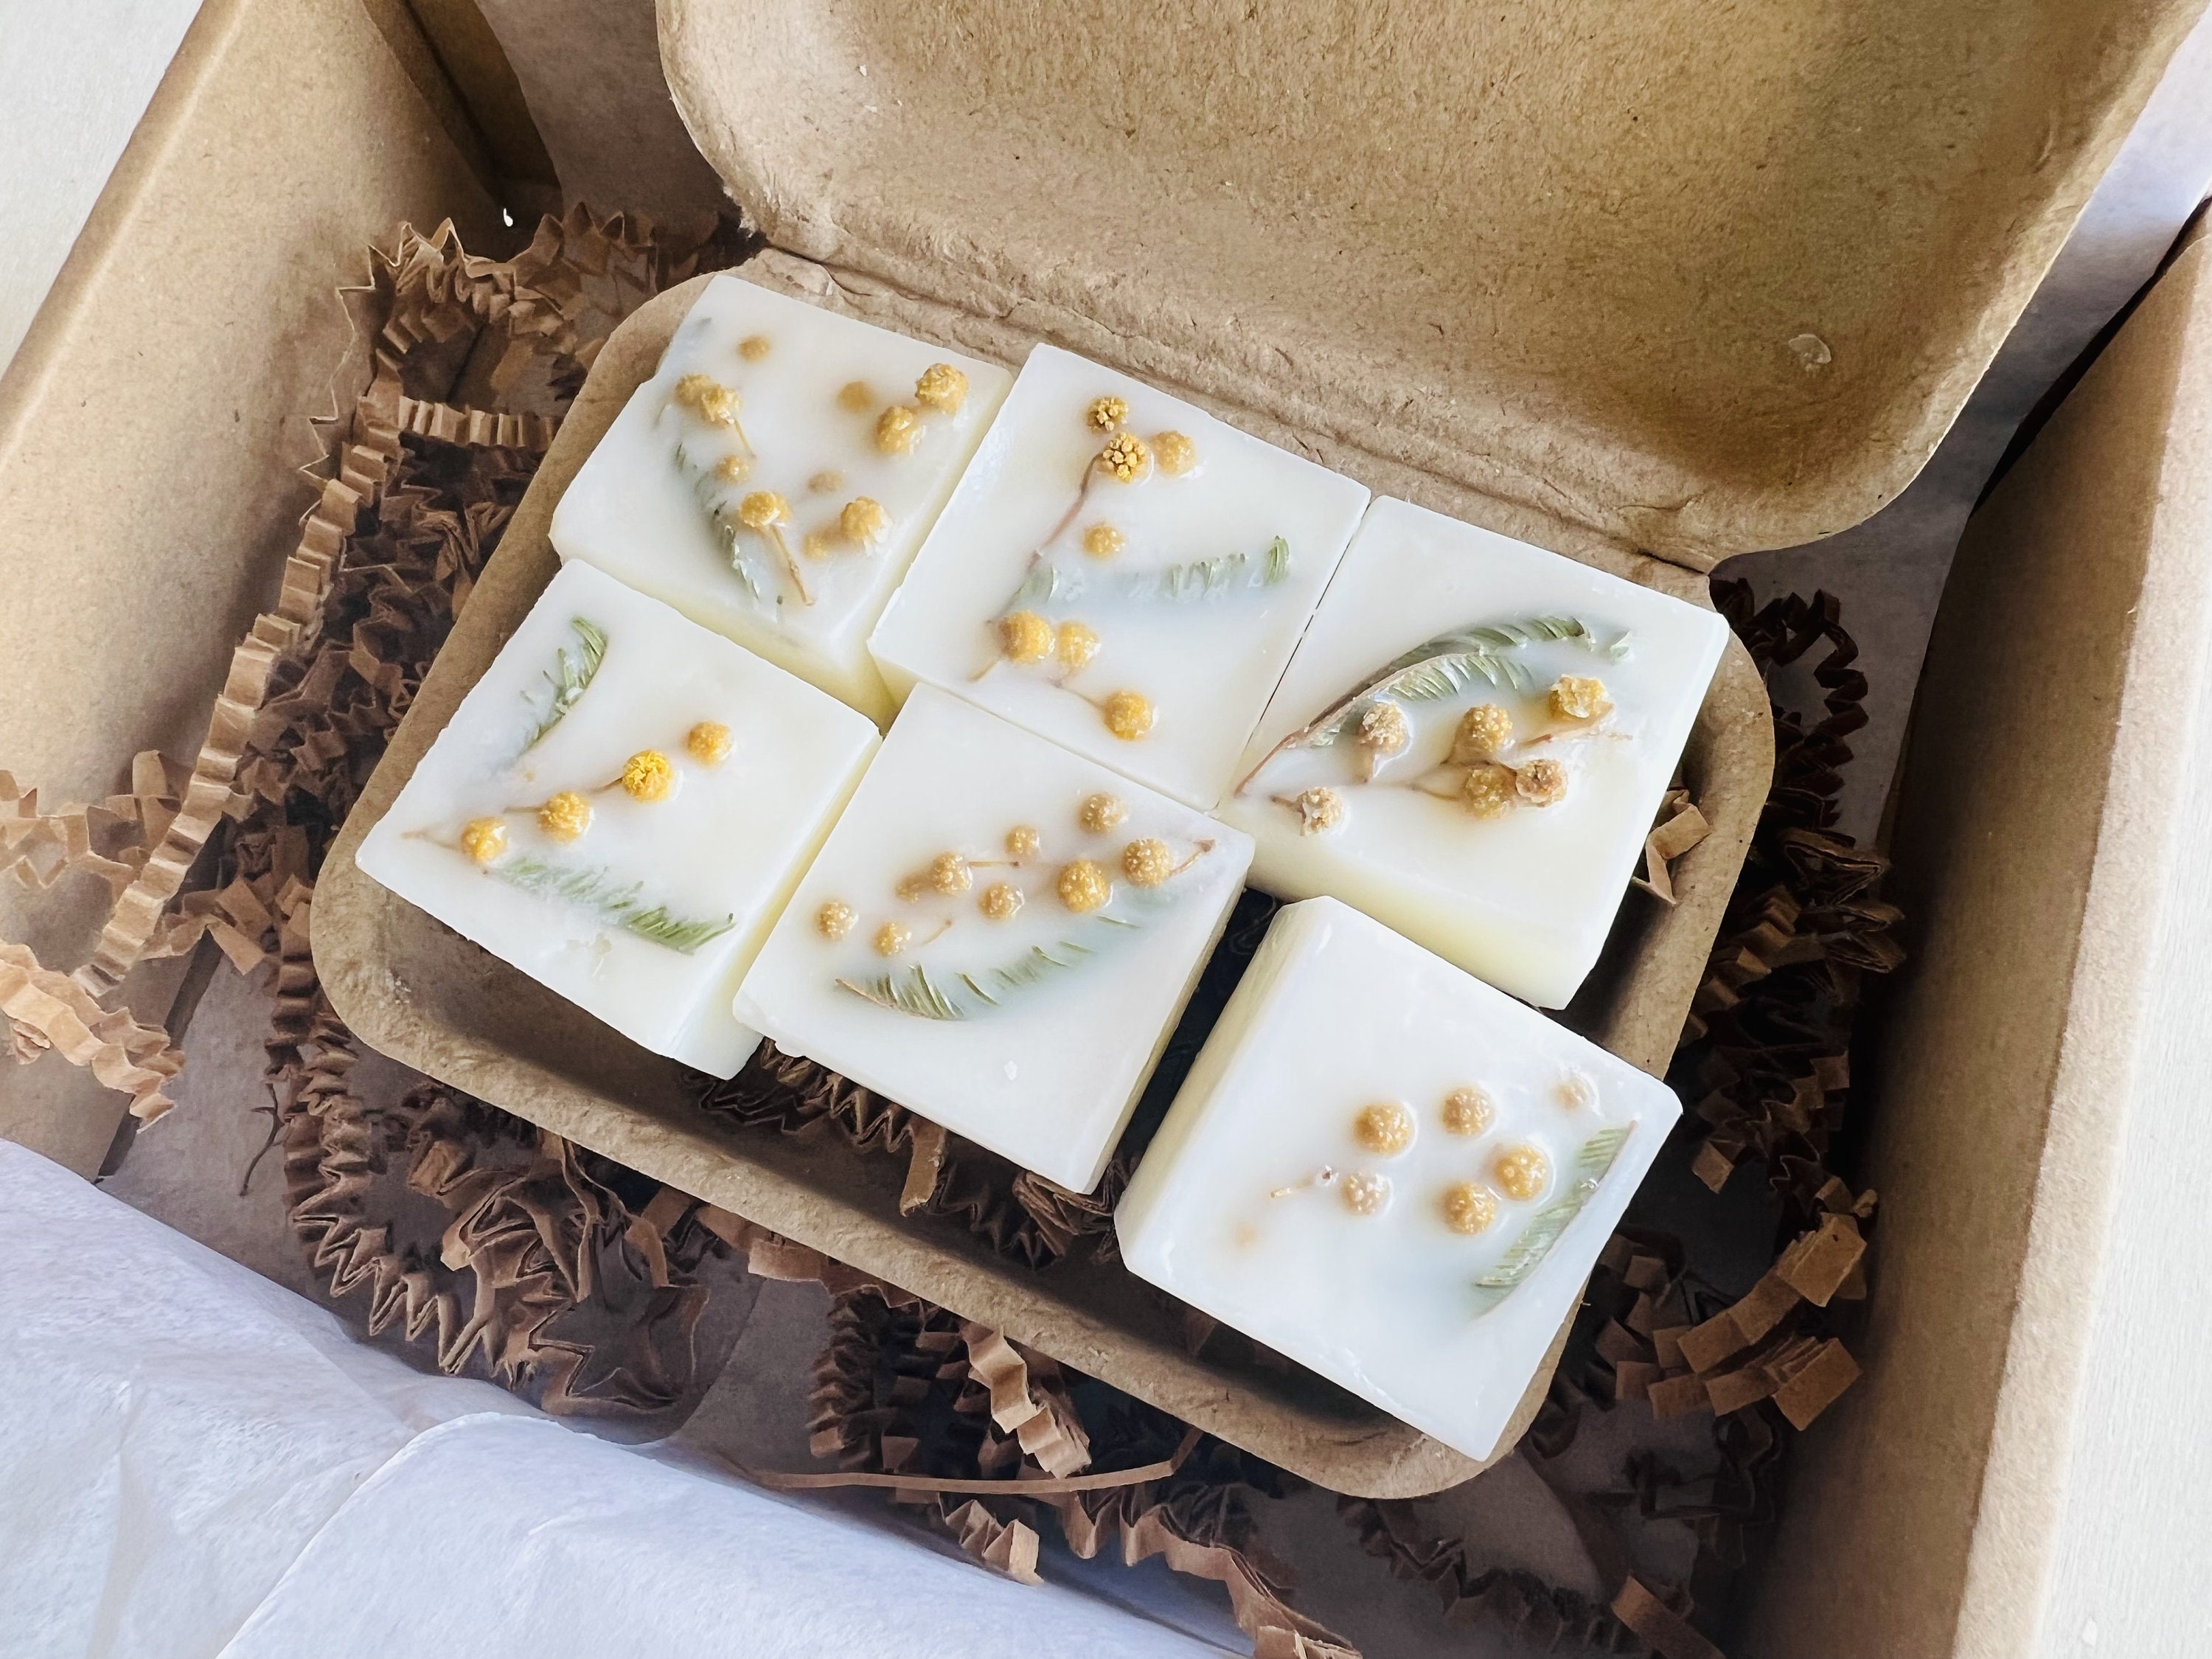 Luxury Eco-friendly Long Lasting Wax Melts With Botanicals 